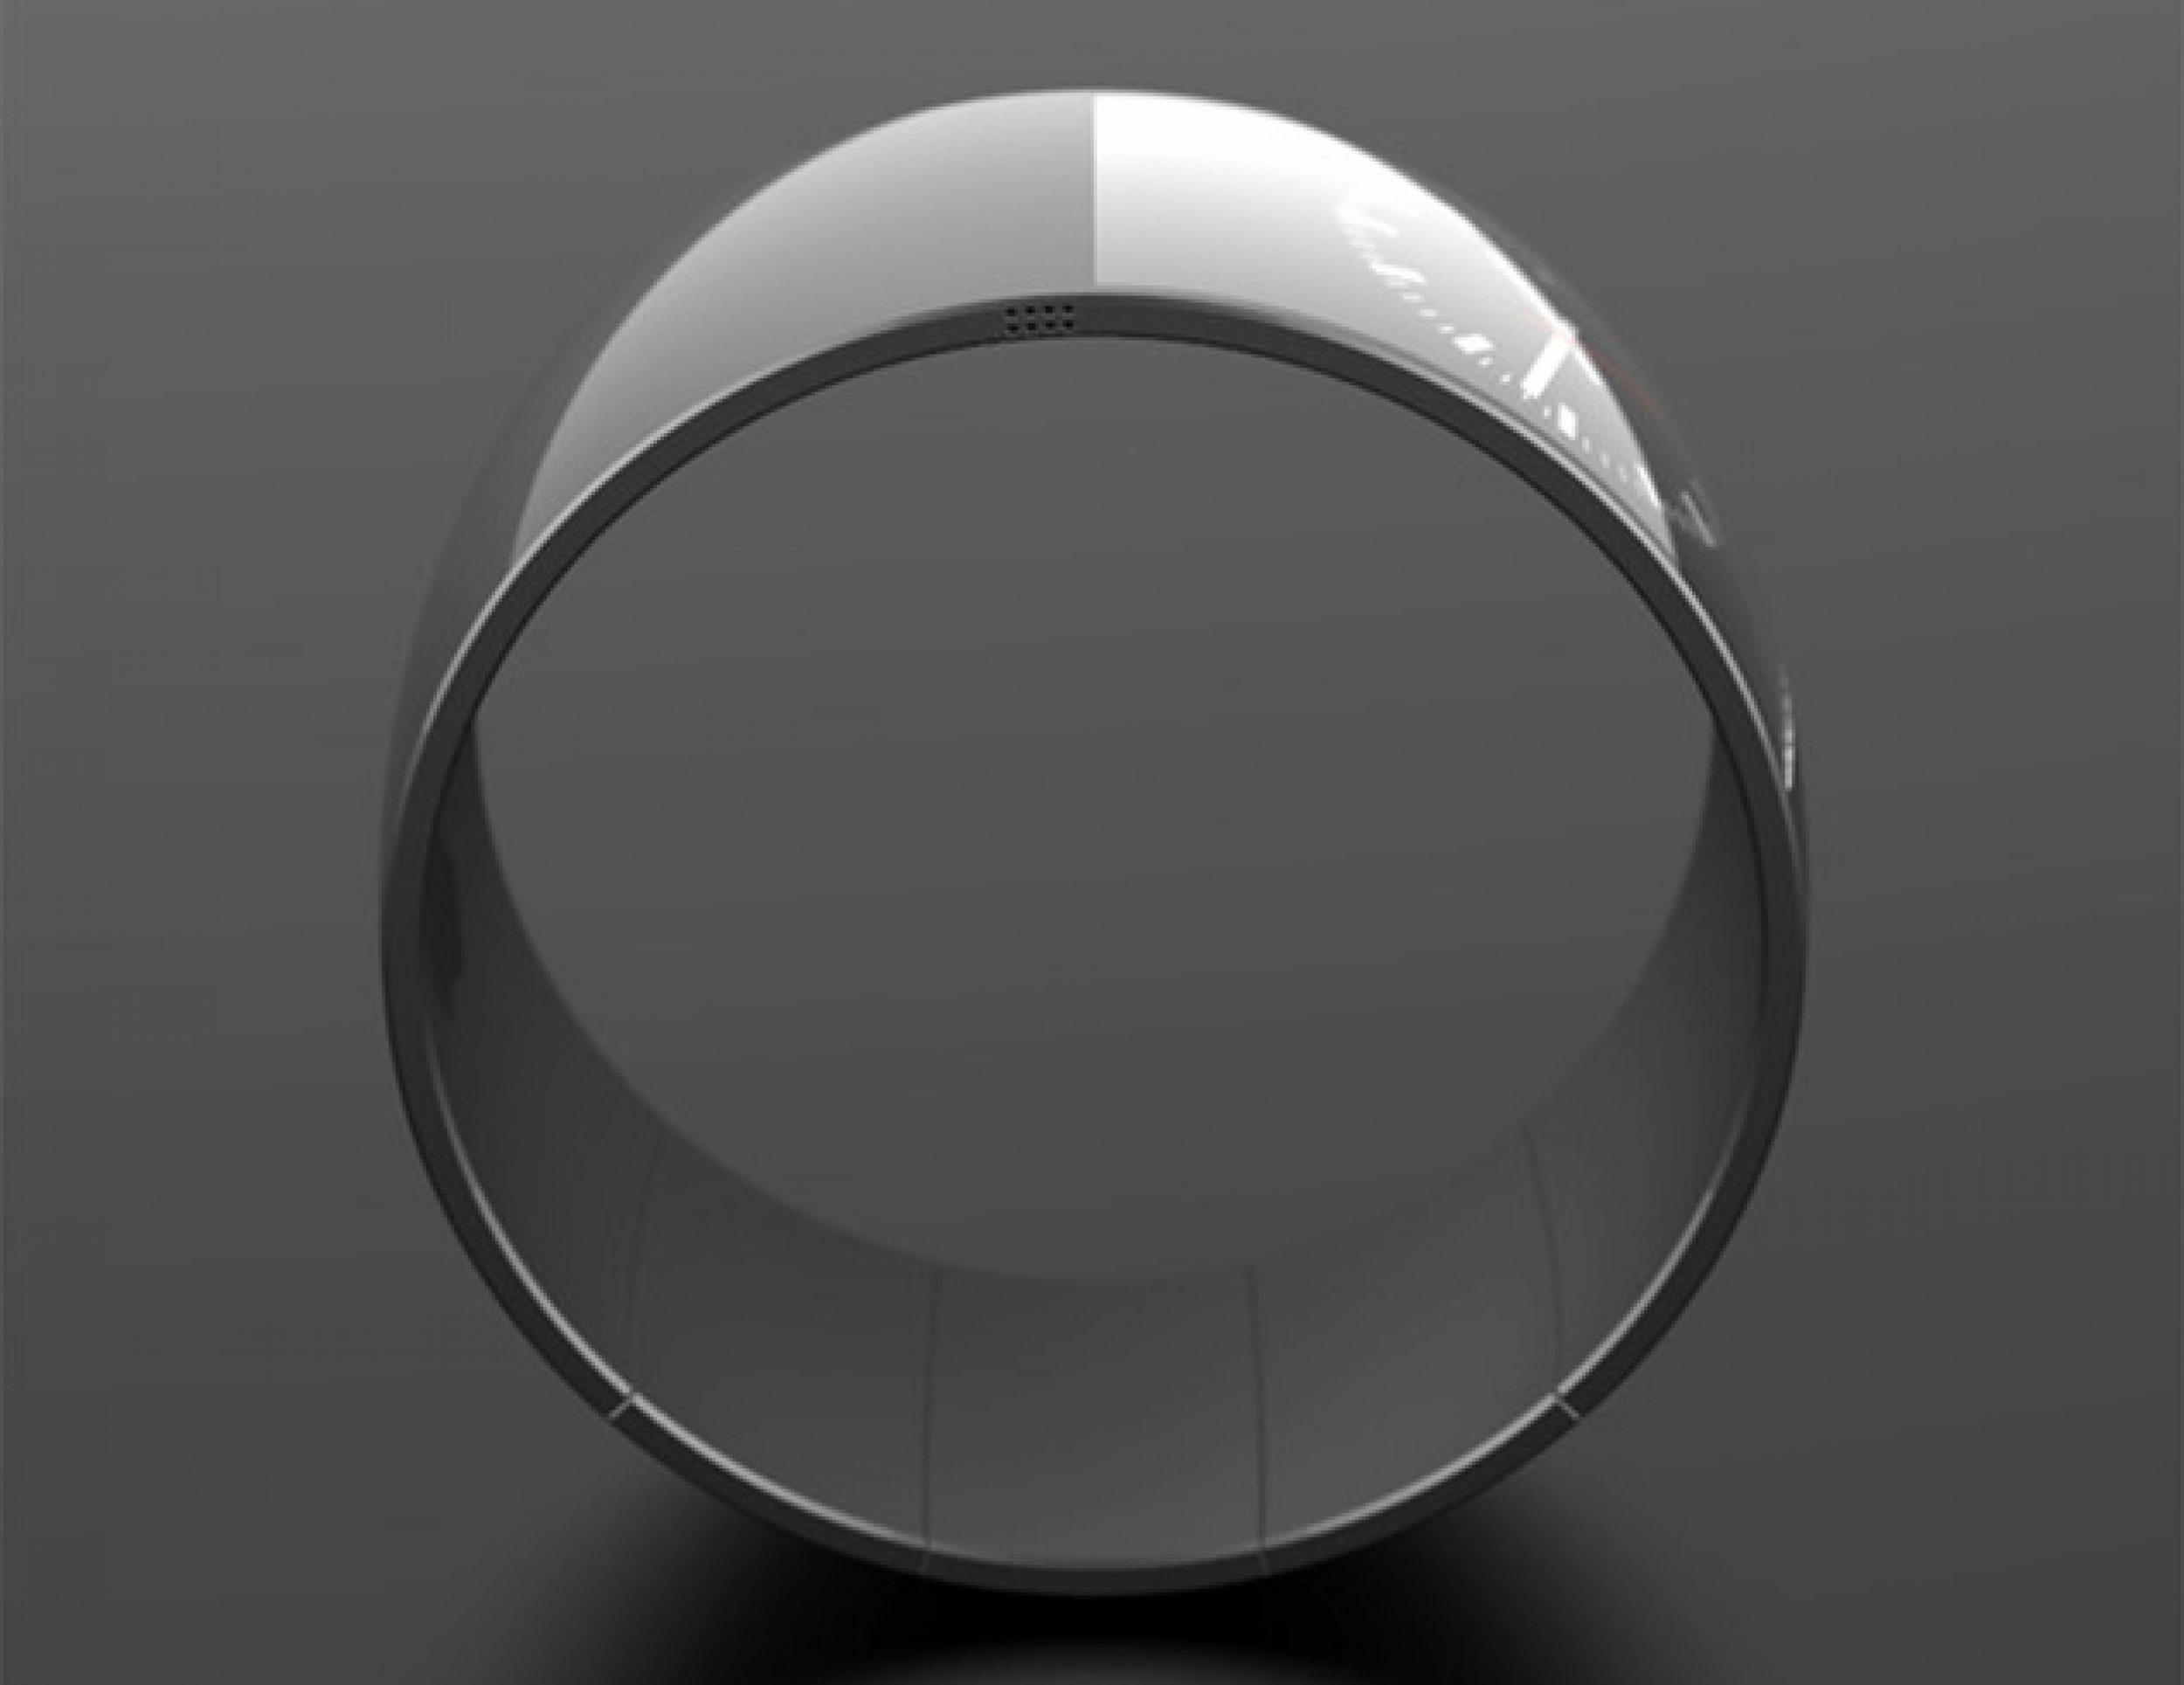 apple-iwatch-concept-1